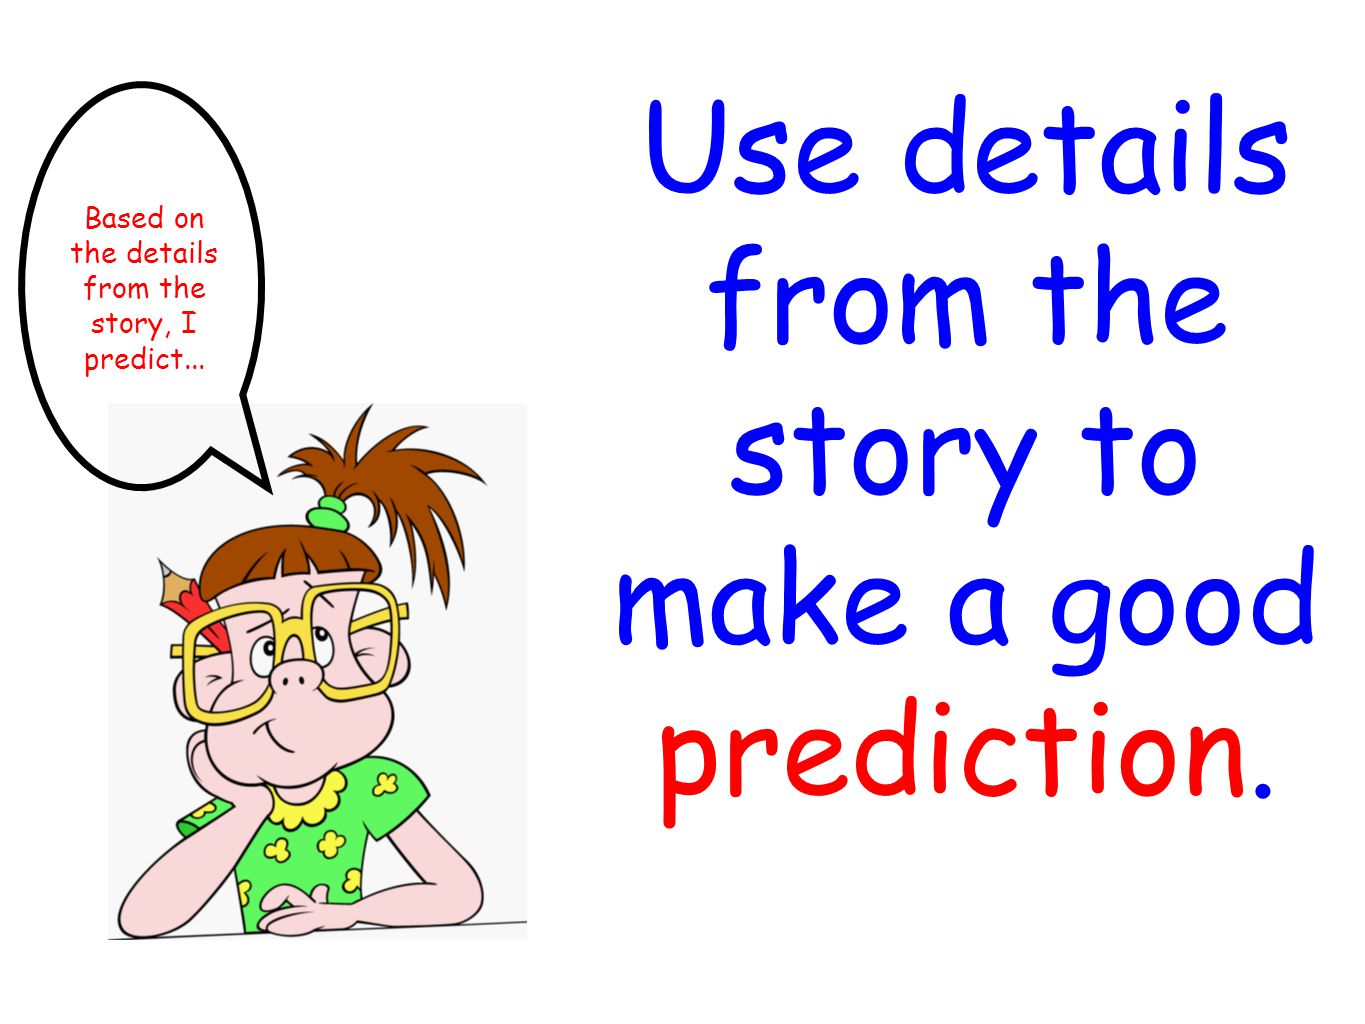 Use details from the story to make a good prediction.